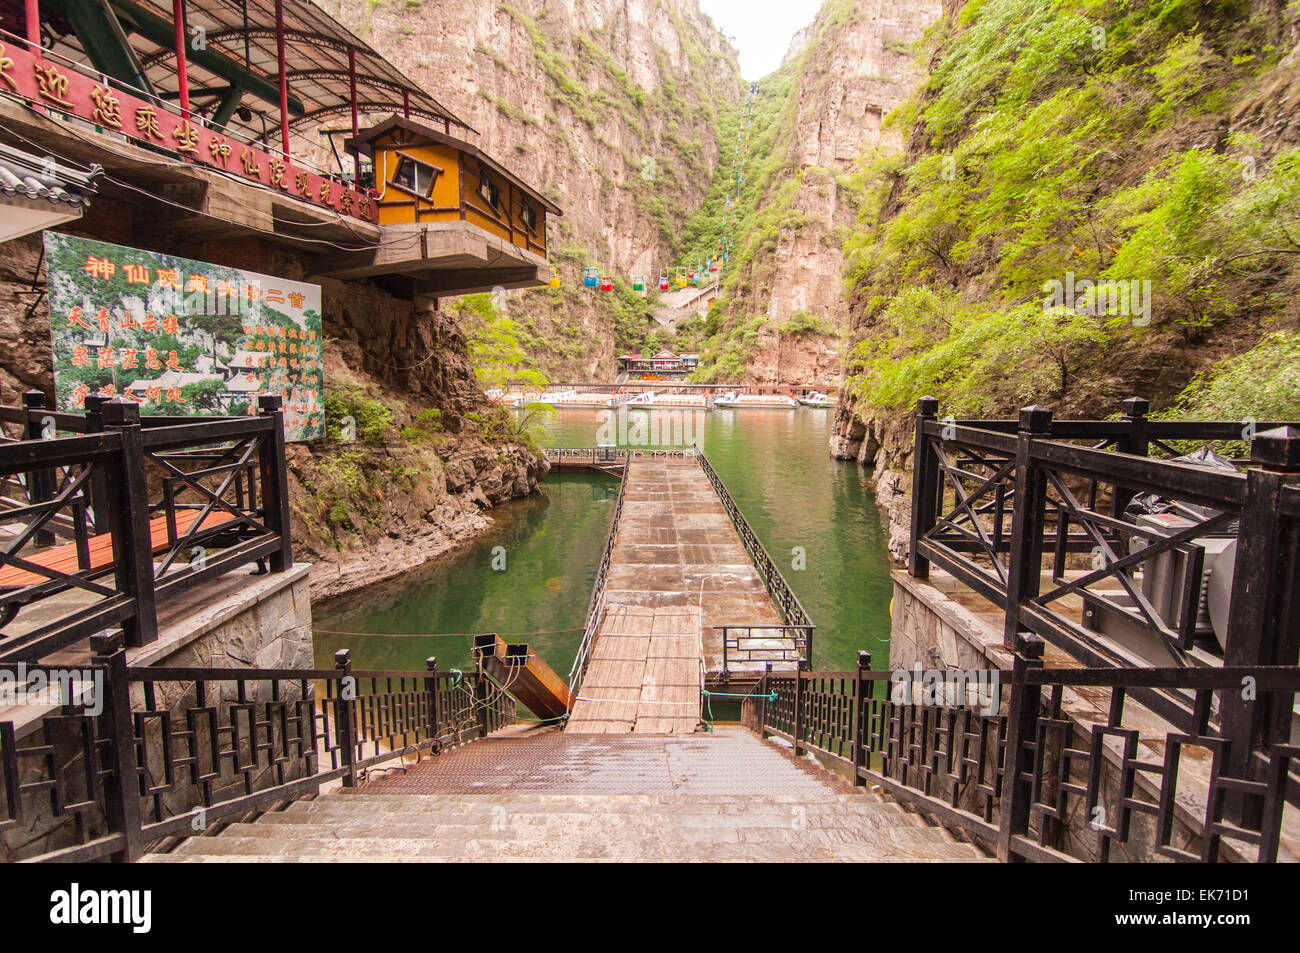 BEIJING,CHINA-MAY 24,2013: Cable car and boats in Long Qing Xia. Stock Photo